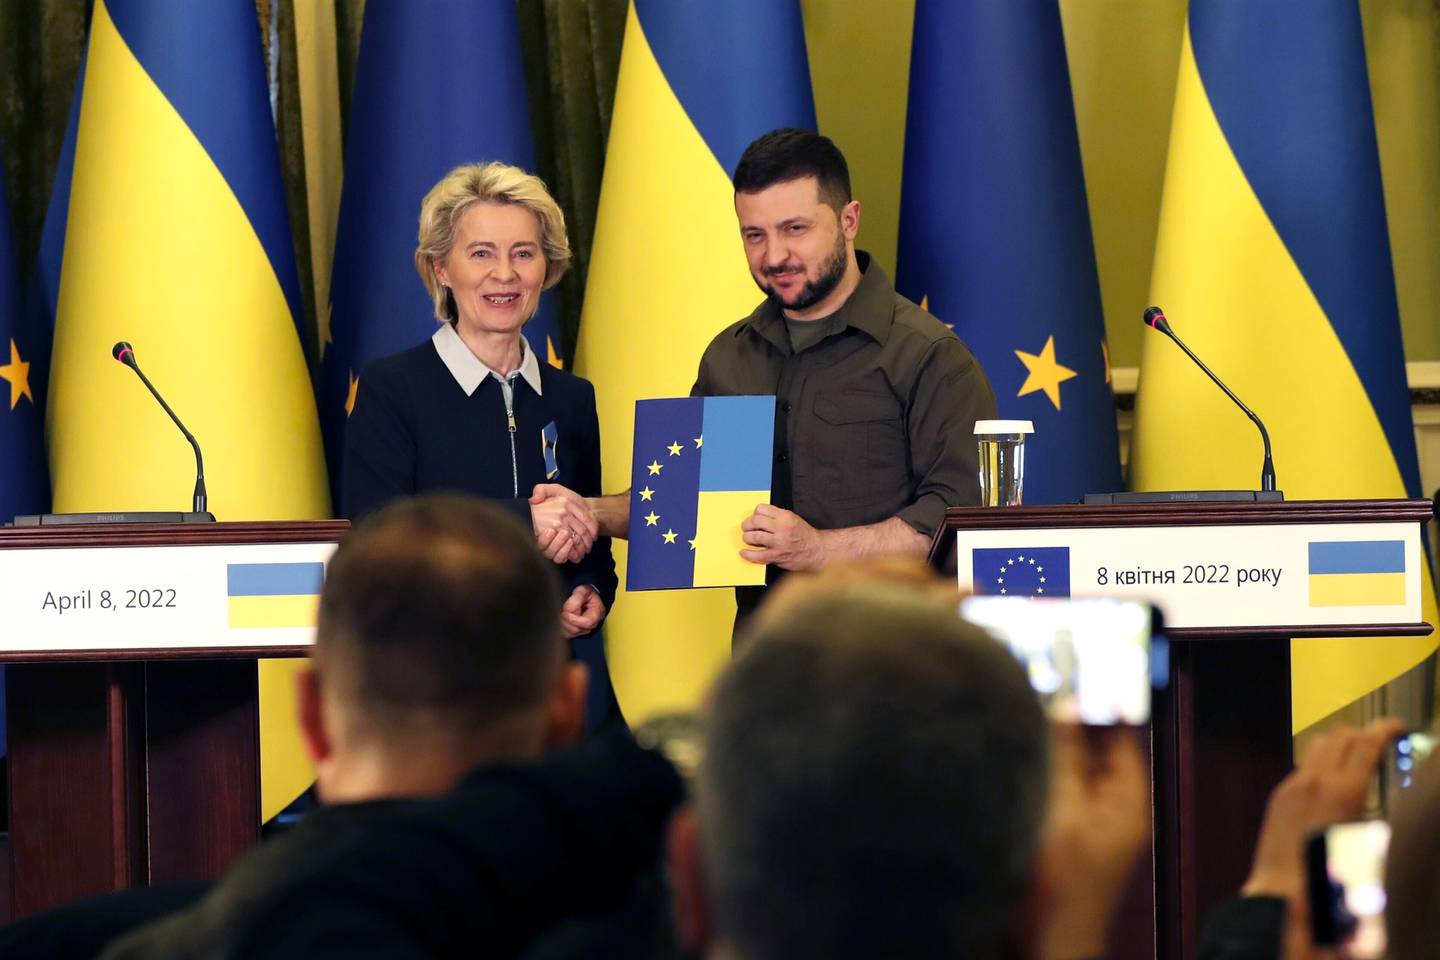 Ukrainian President Volodymyr Zelenskyy receives a questionnaire to begin the process for considering his country's application for European Union membership. AP